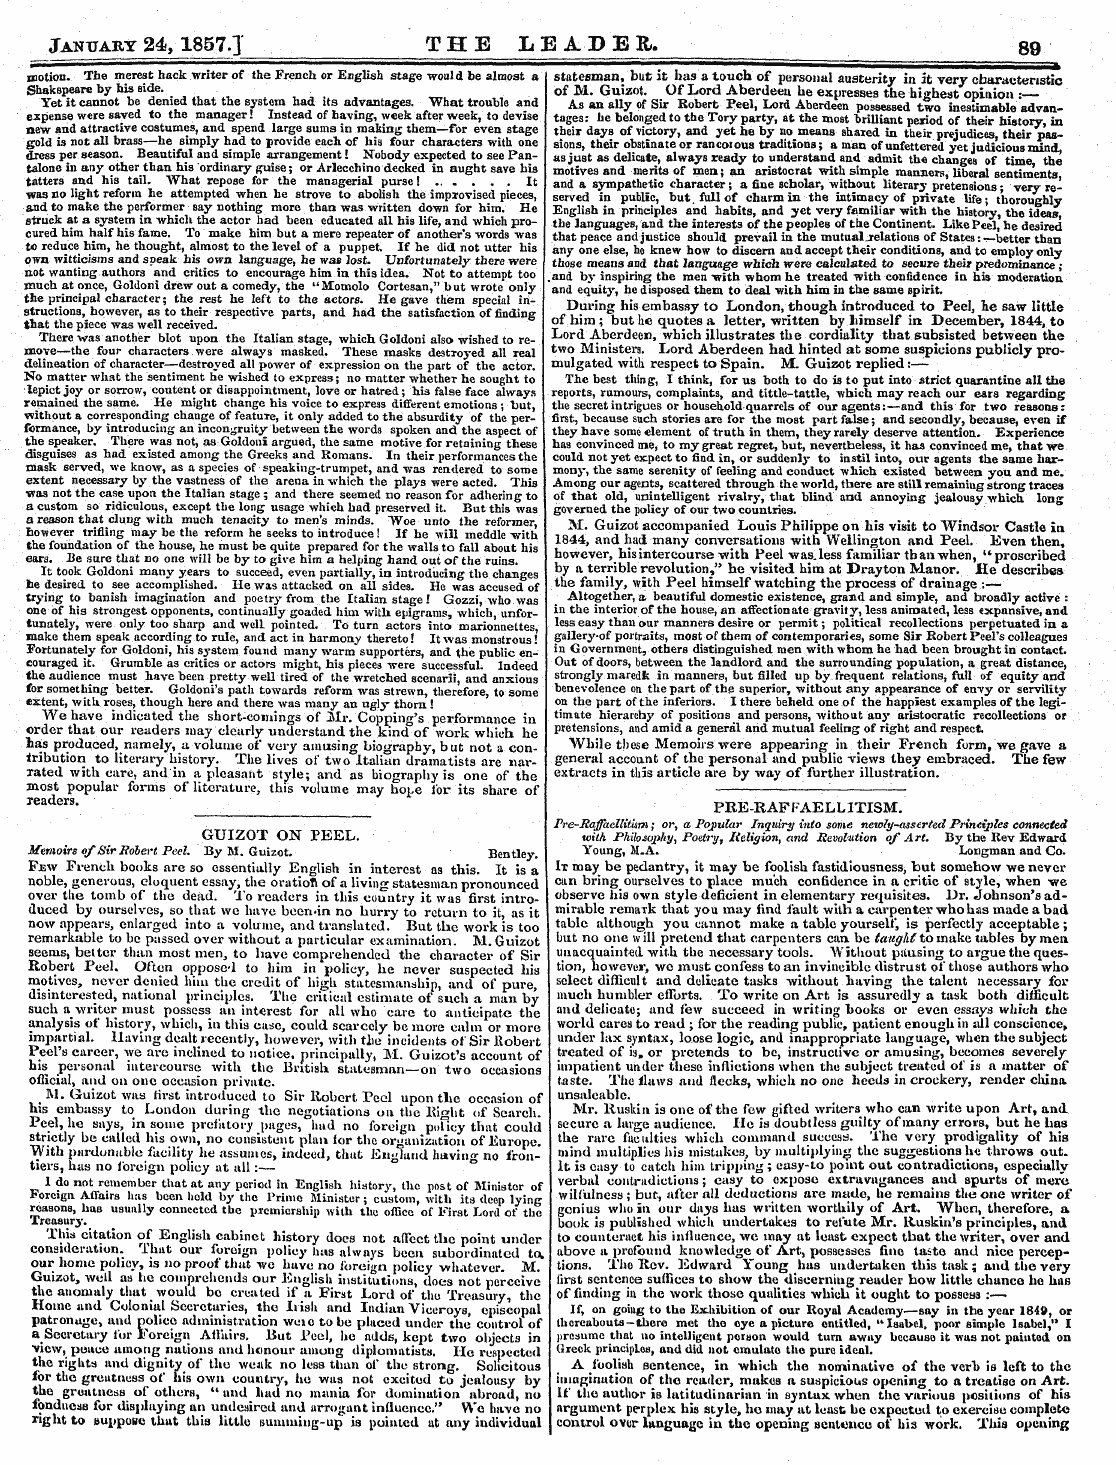 Leader (1850-1860): jS F Y, 2nd edition - January 24y 1857.] The Le Ape It. 89